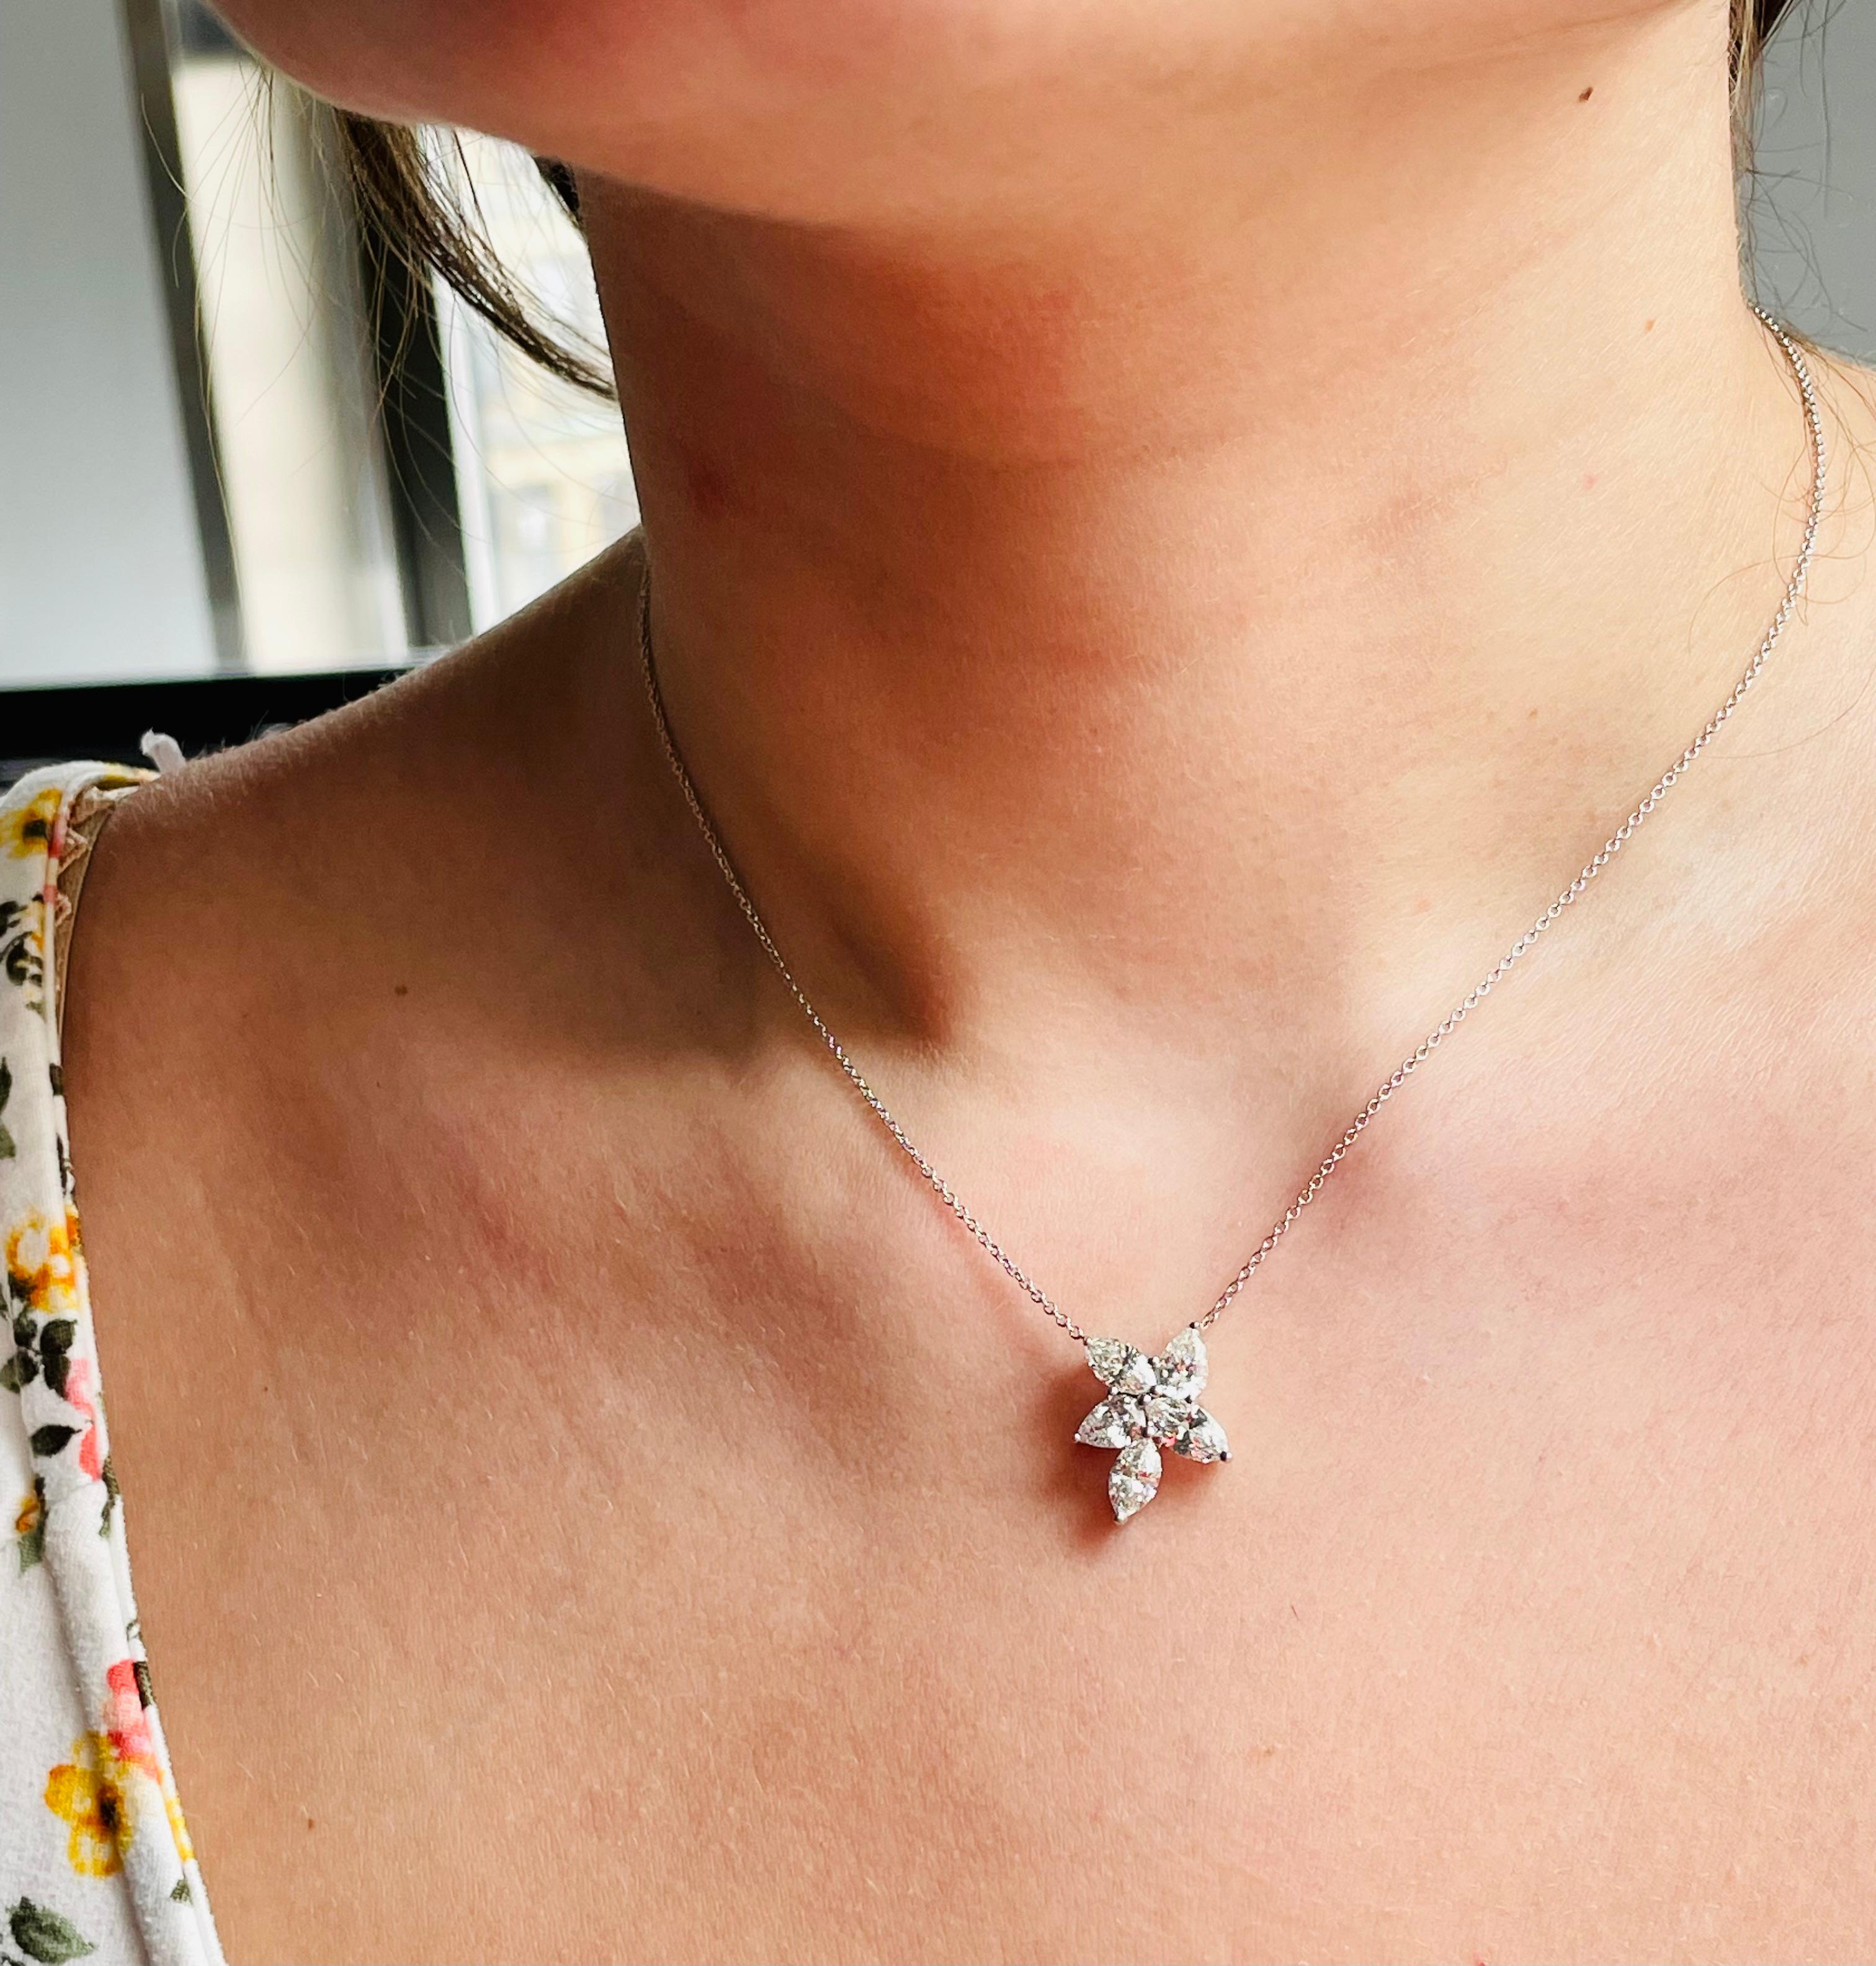 This glamorous diamond pendant by J. Birnbach is a fresh take on a classic style. The asymmetrical arrangement of pear and marquise shape diamonds creates interest and texture, perfect for someone who loves a unique design. This striking piece